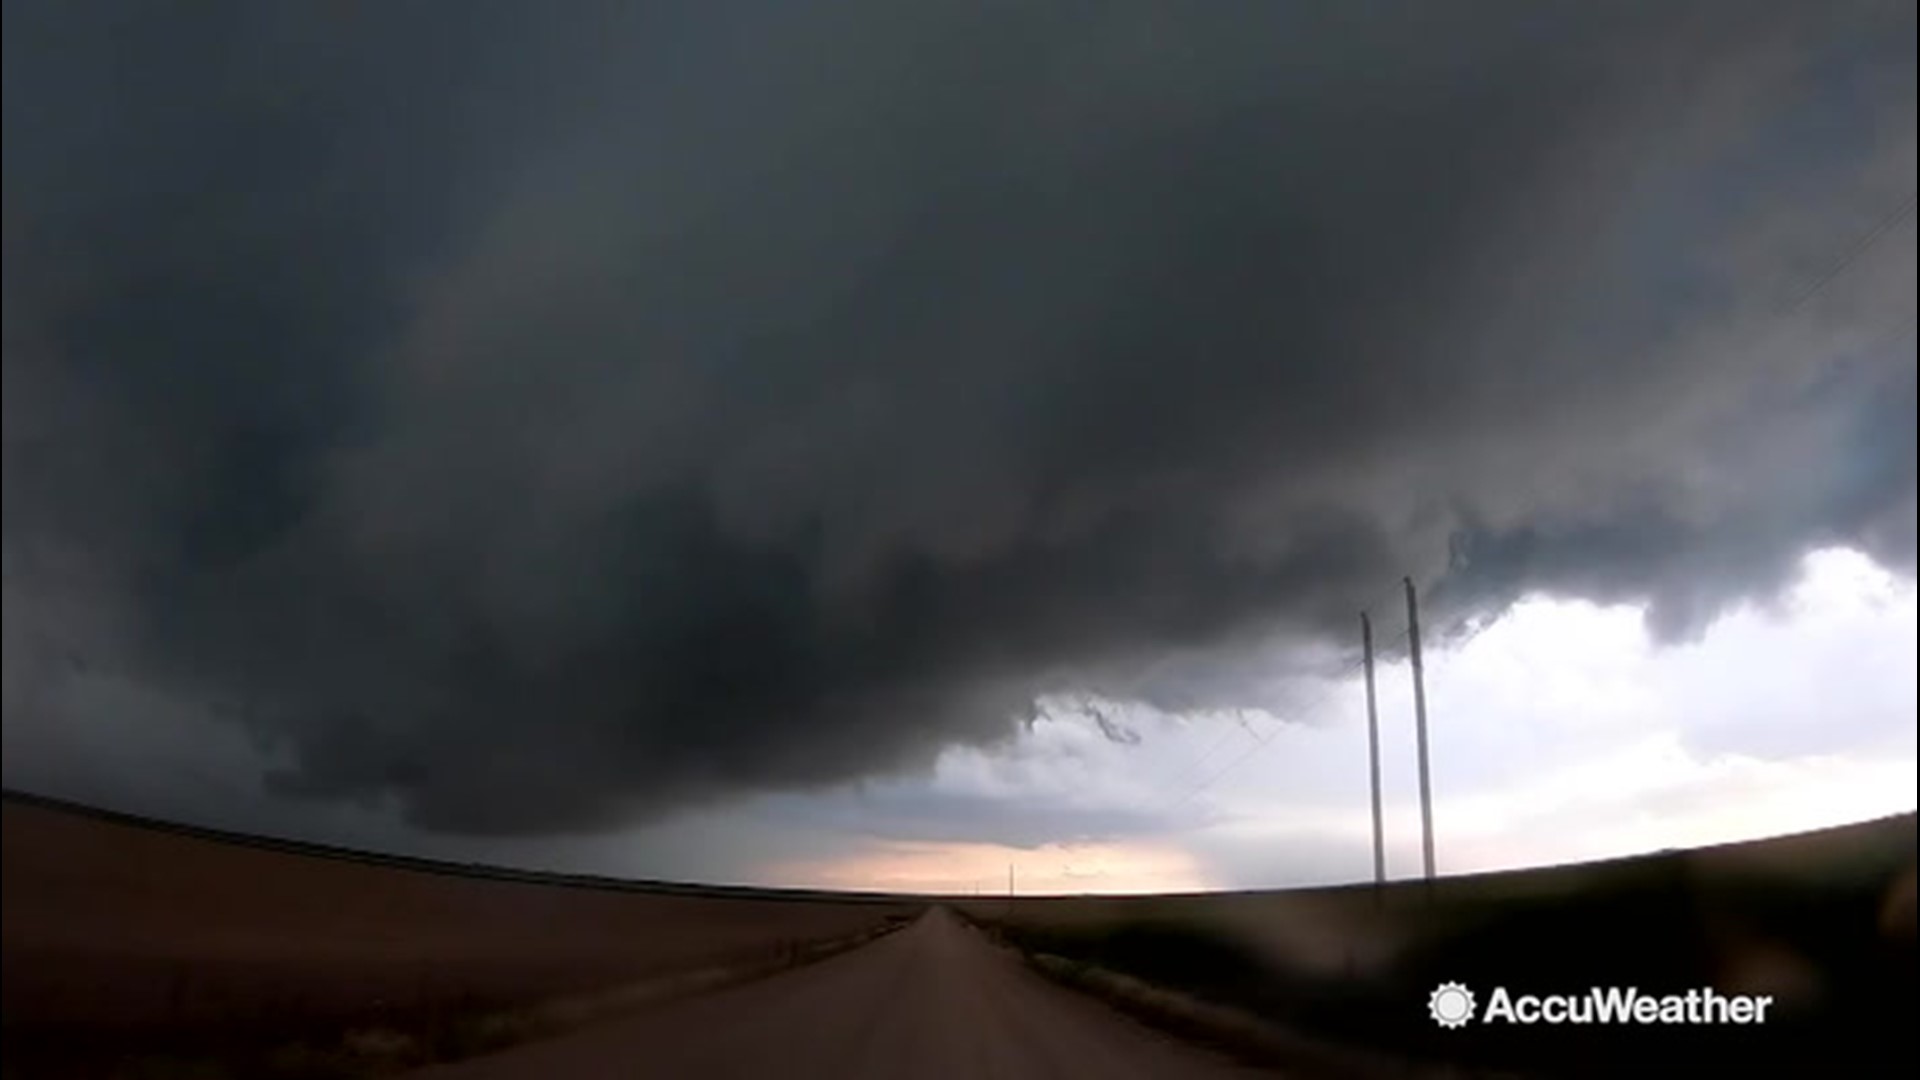 Take a look at this impressive time-lapse video of ominous clouds developing over Bethune, Colorado, on Aug. 13. The video was recorded by storm chaser Reed Timmer who was out chasing tornadoes that day.